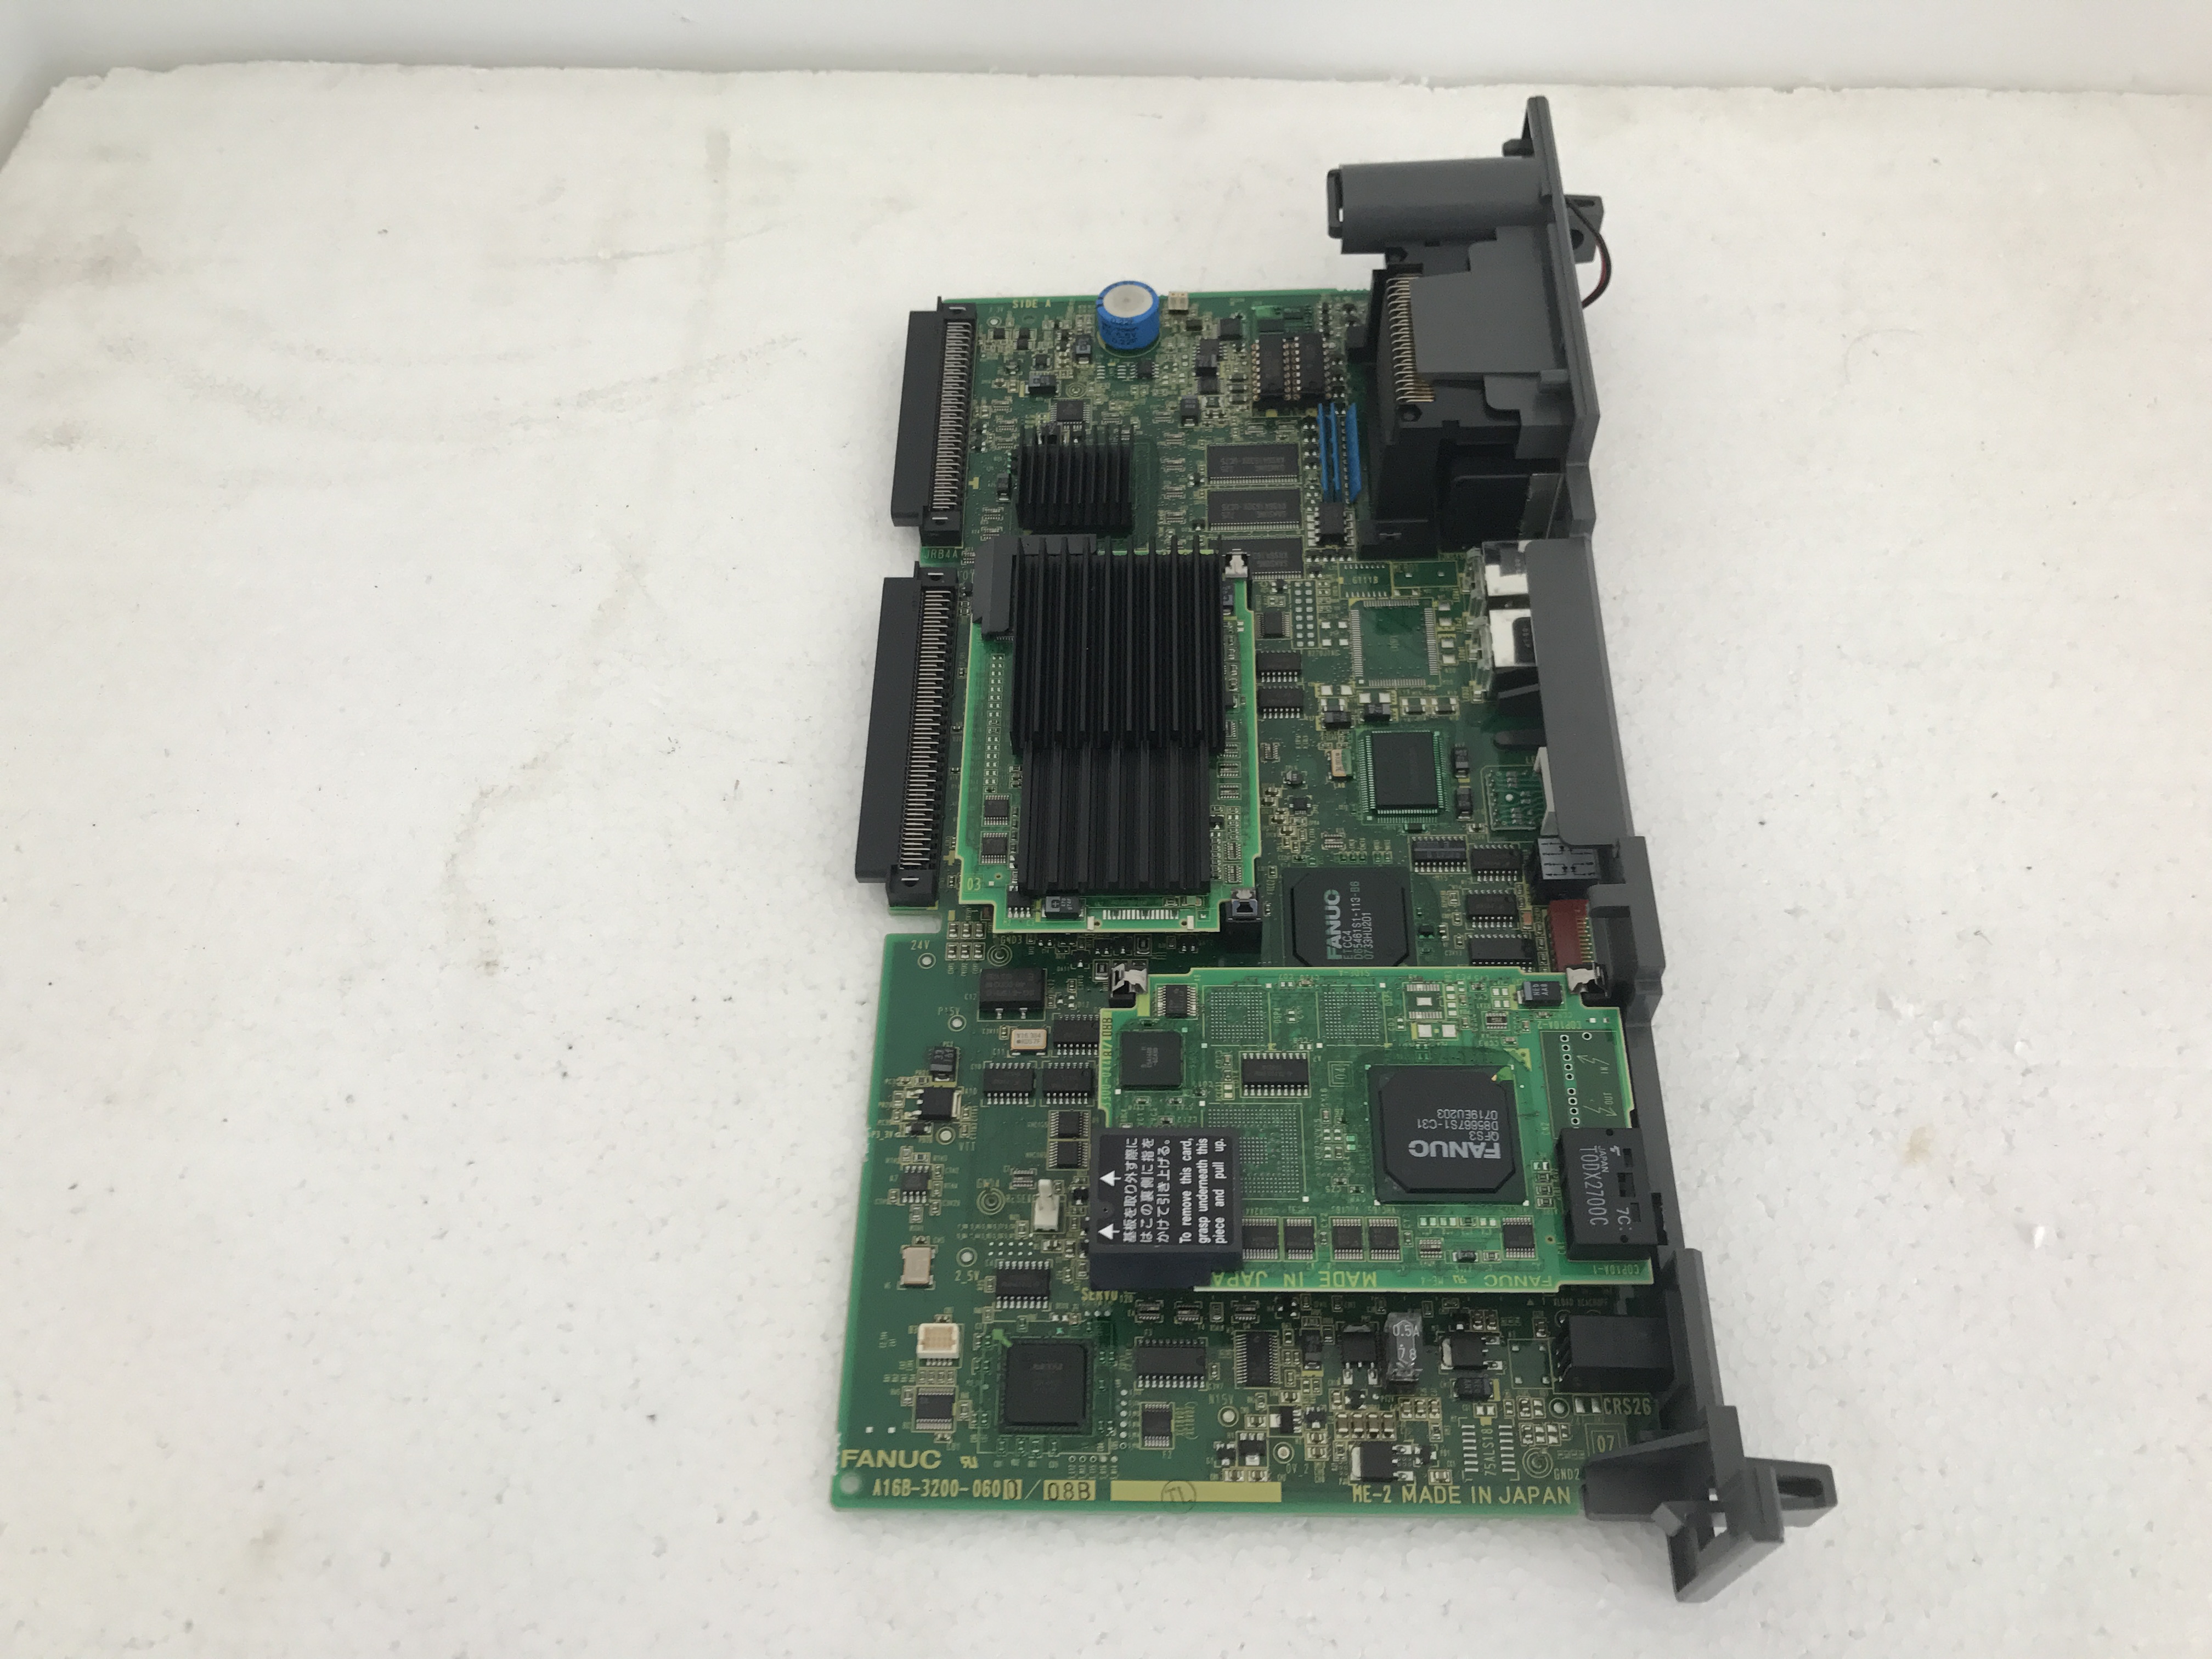 Warranty Details about   Fanuc Robotics PC Board A16B-3200-0040 / 05D Used No Daughter Boards 